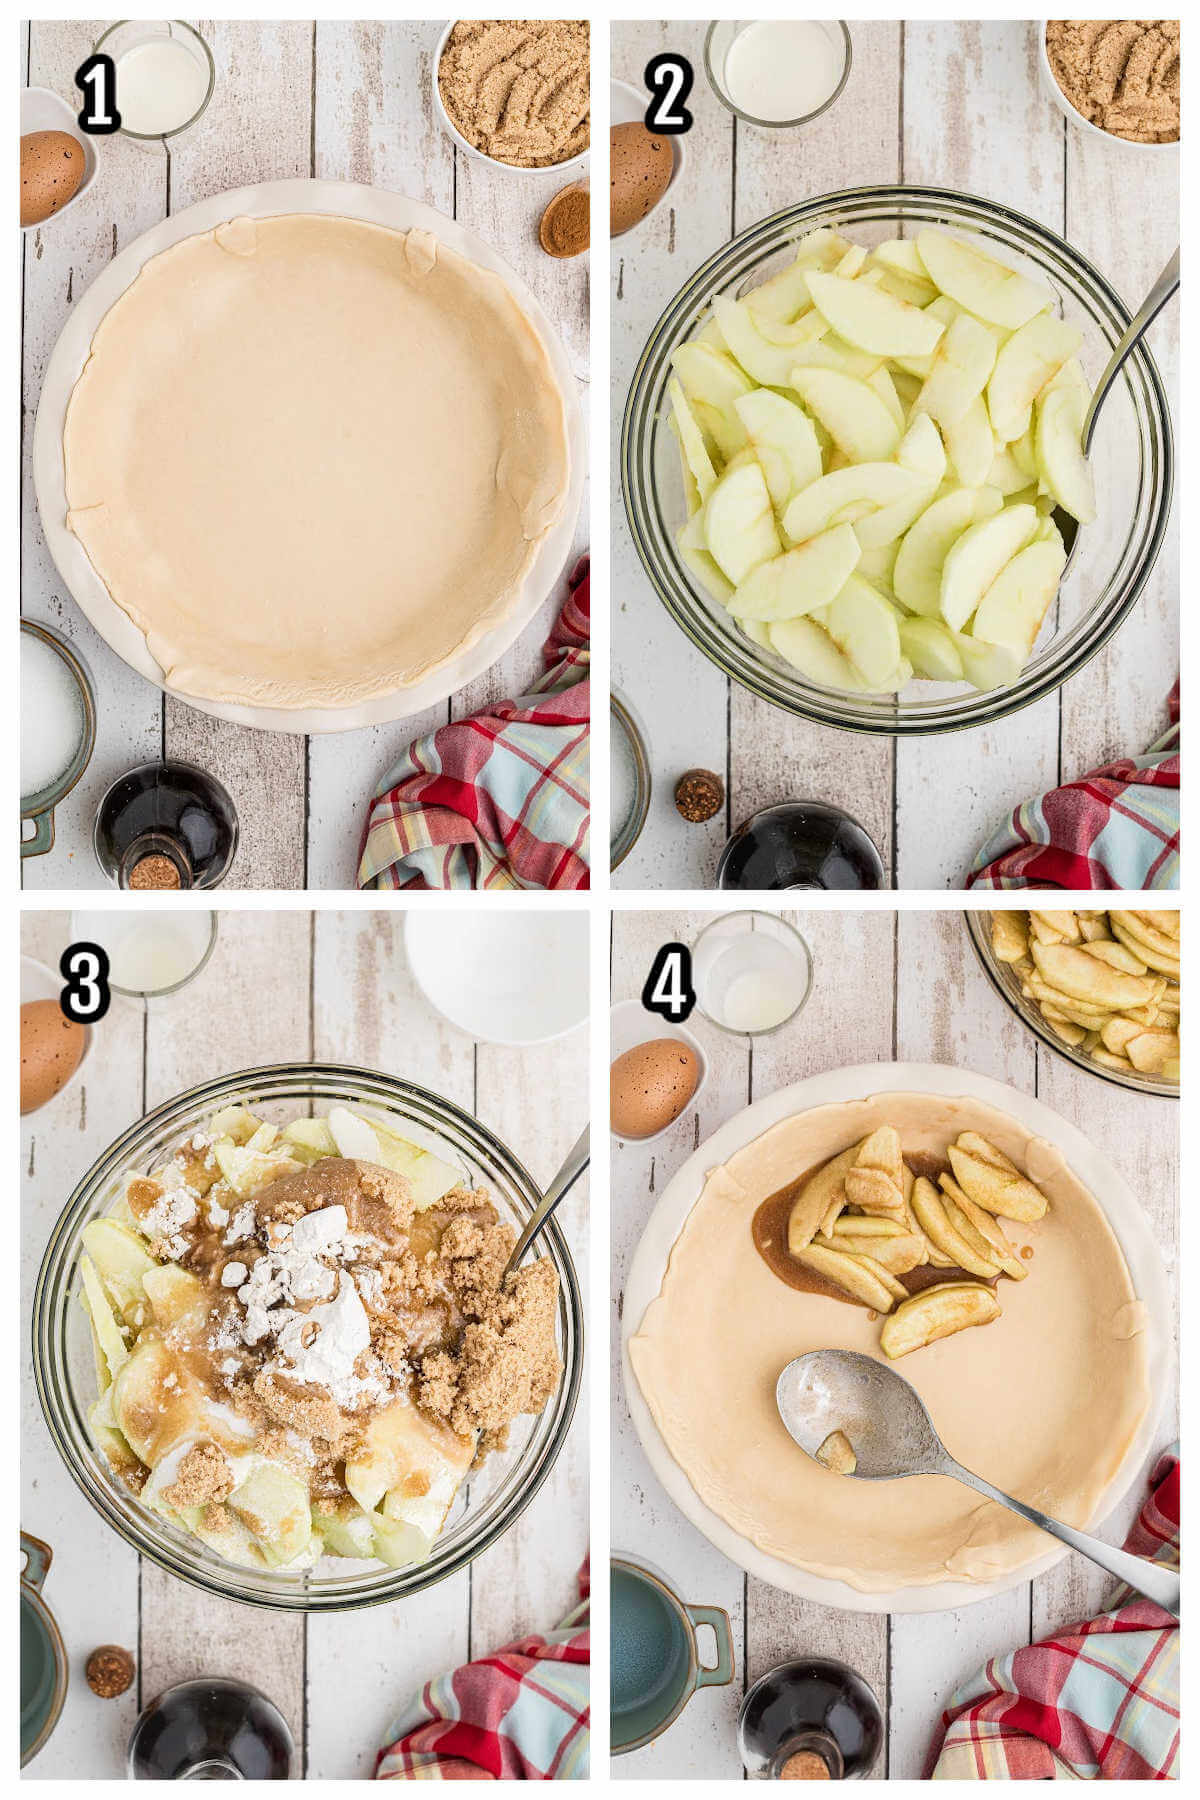 The first four steps to making an apple pie American style. 